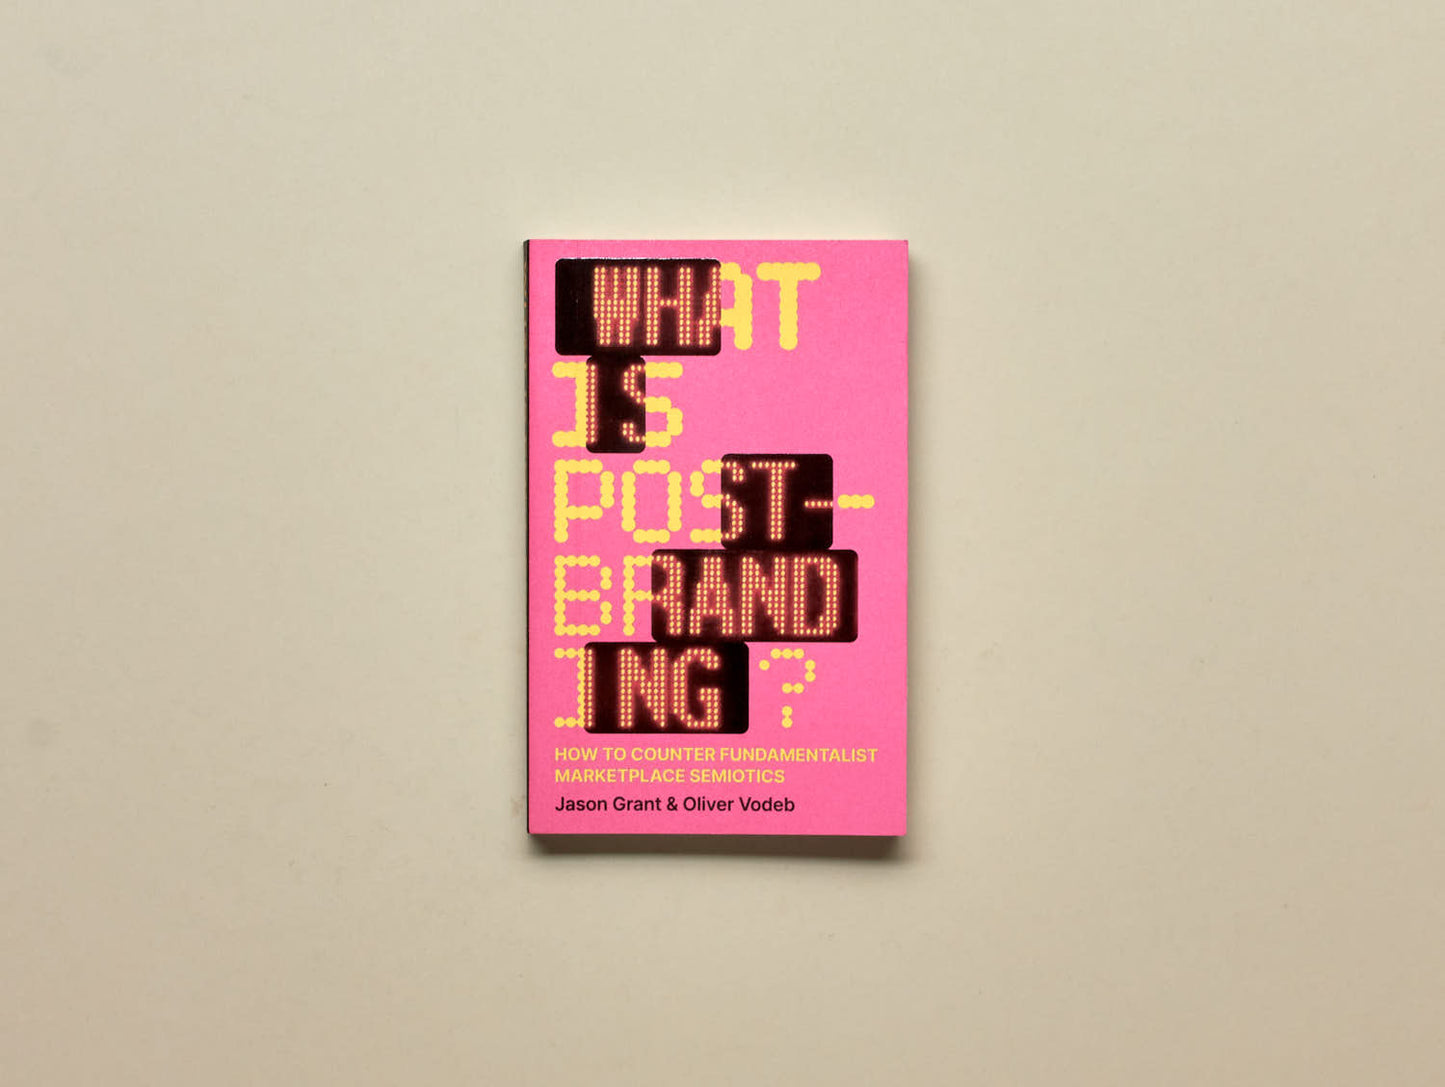 Oliver Vodeb and Jason Grant, What is post-branding? How to Counter Fundamentalist Marketplace Semiotics